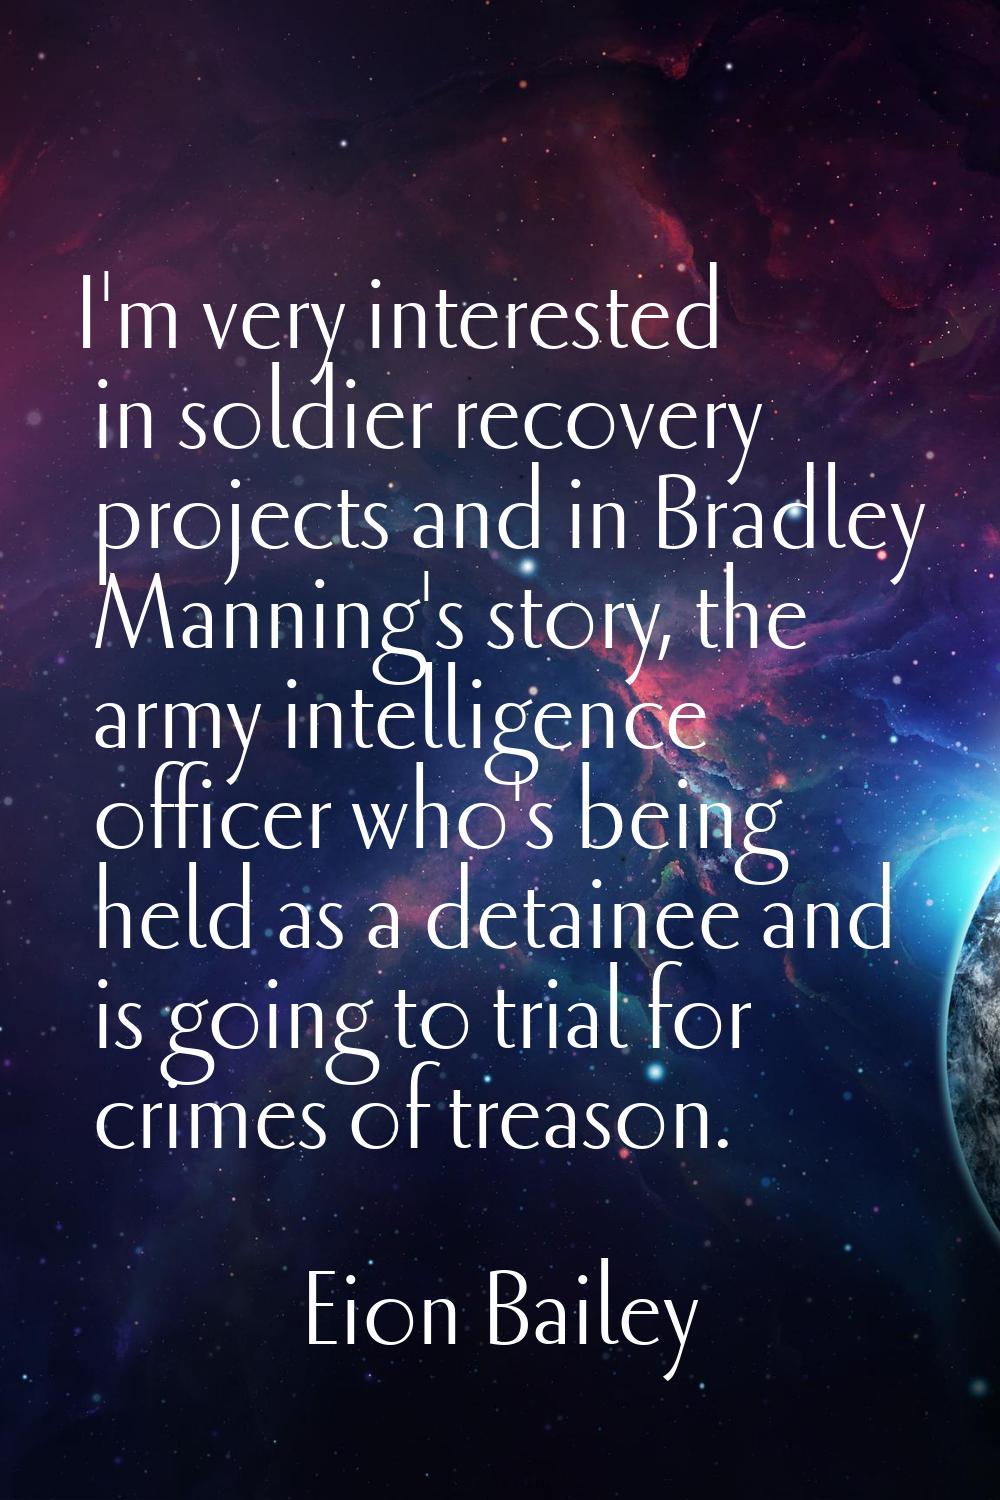 I'm very interested in soldier recovery projects and in Bradley Manning's story, the army intellige